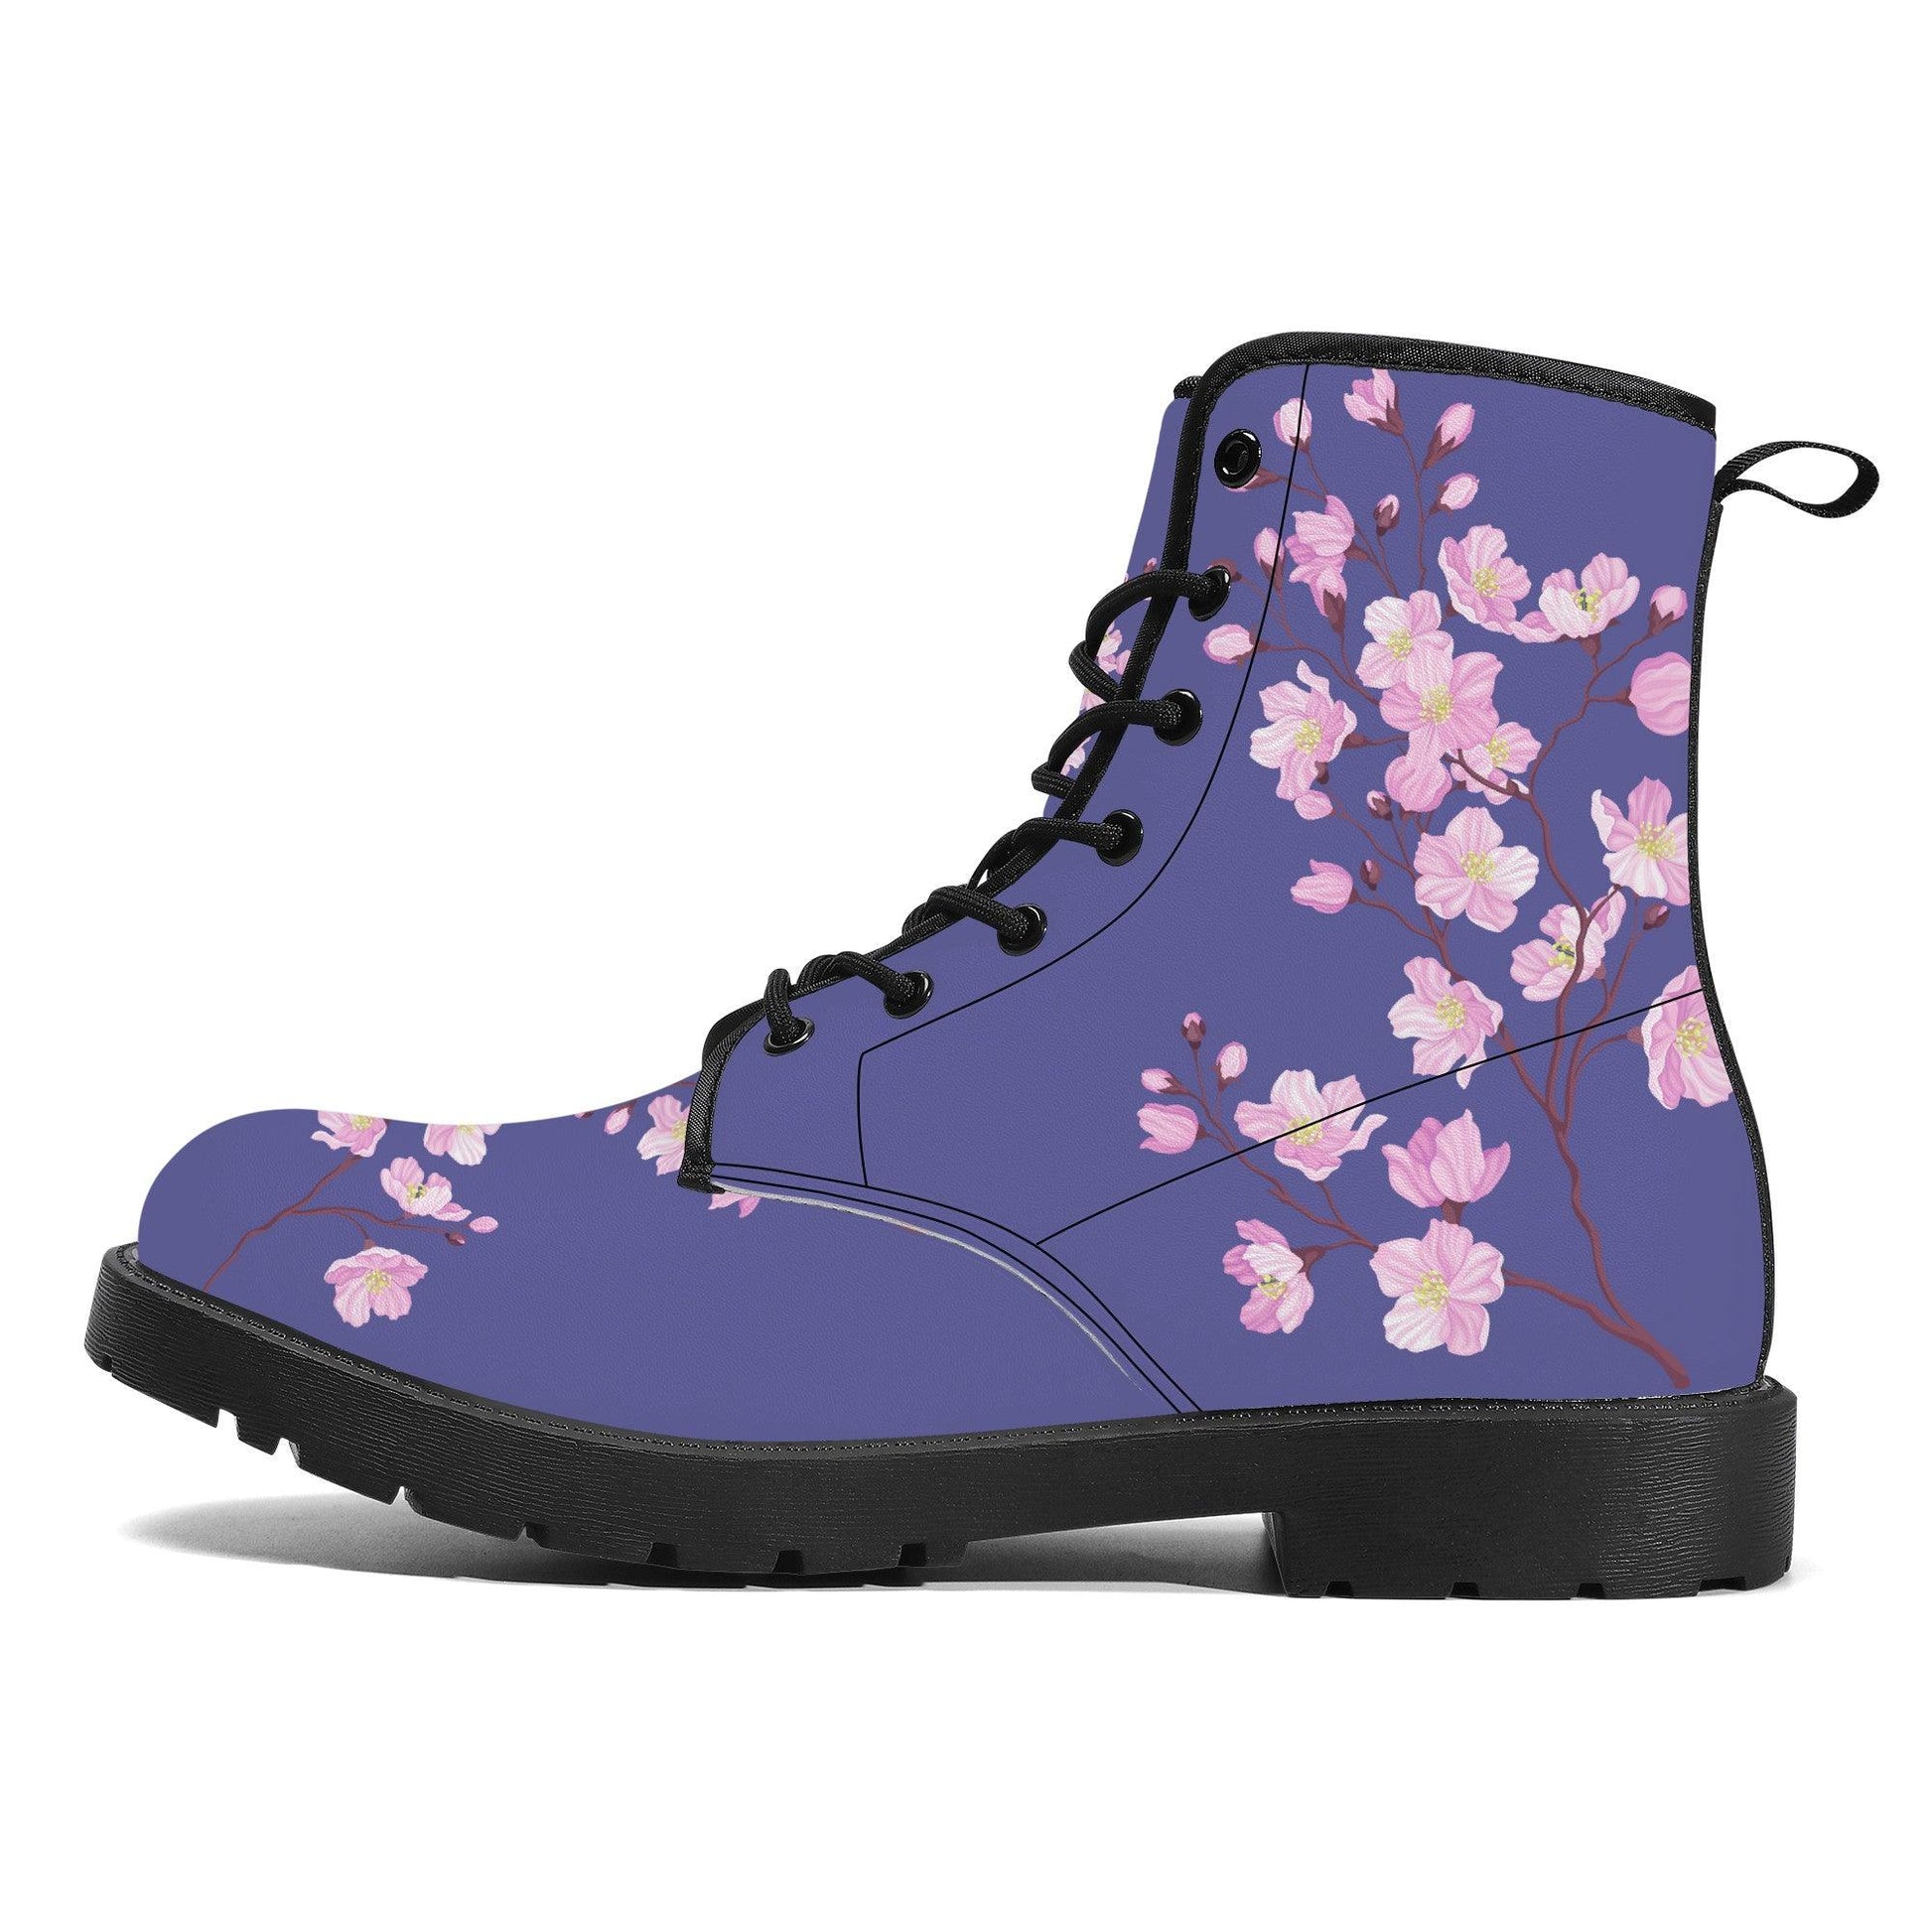 Purple Vegan Leather Boots with Cherry Blossom